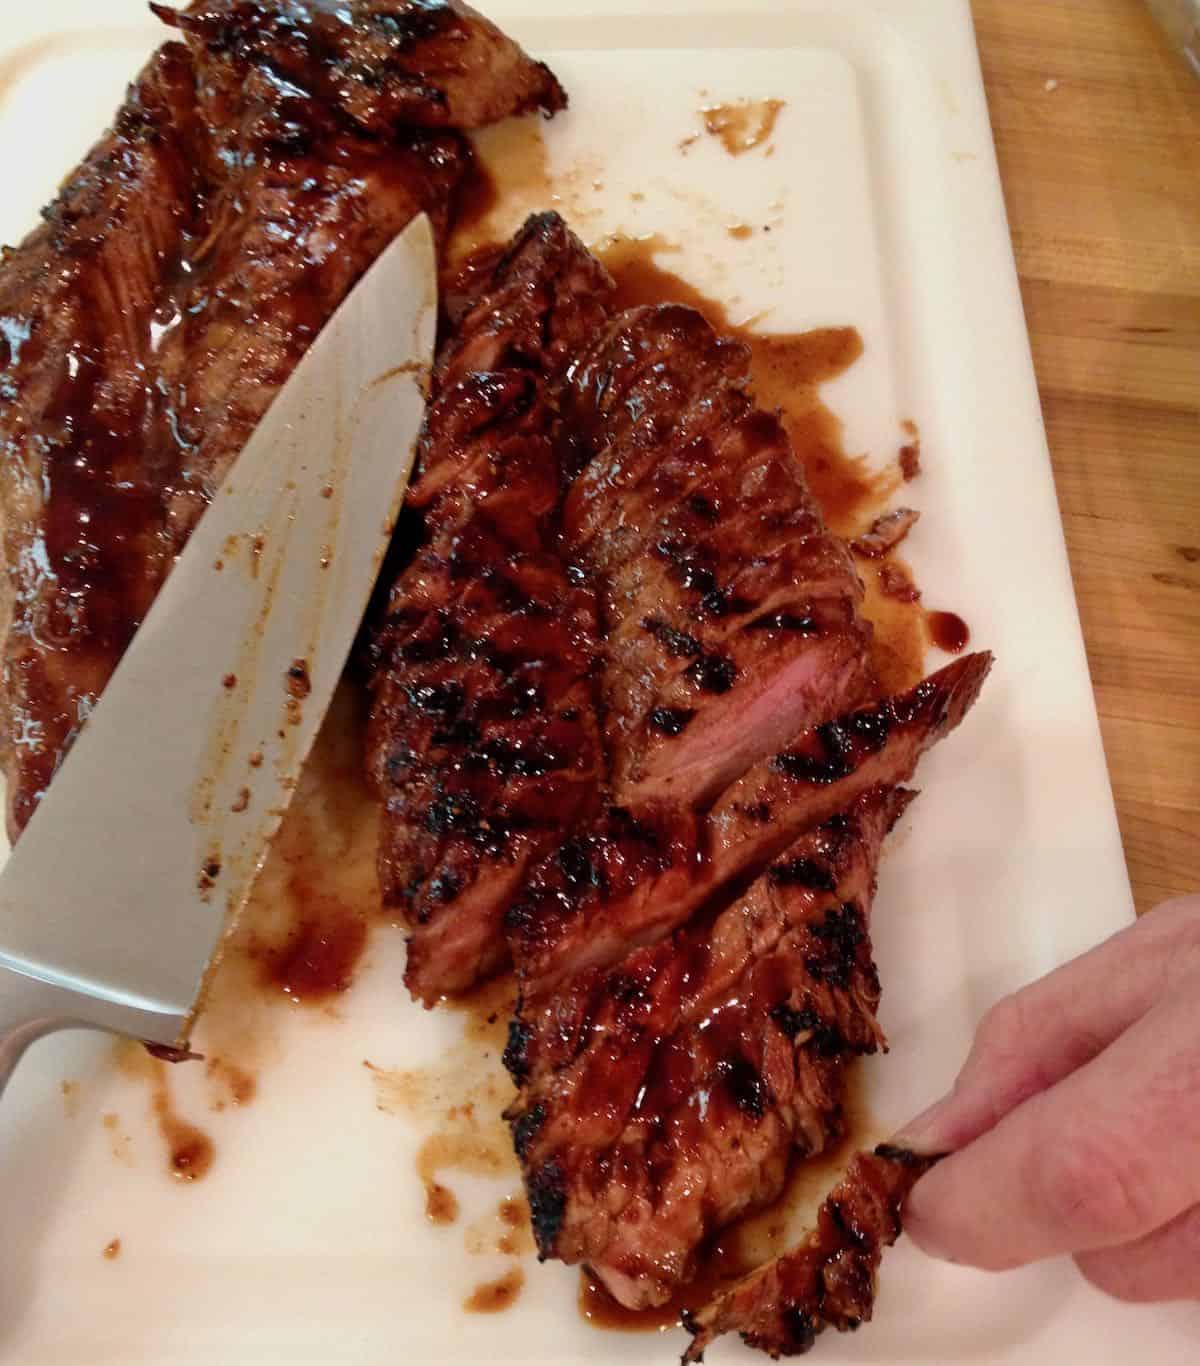 Grilled Steak perfection following these great grilling tips